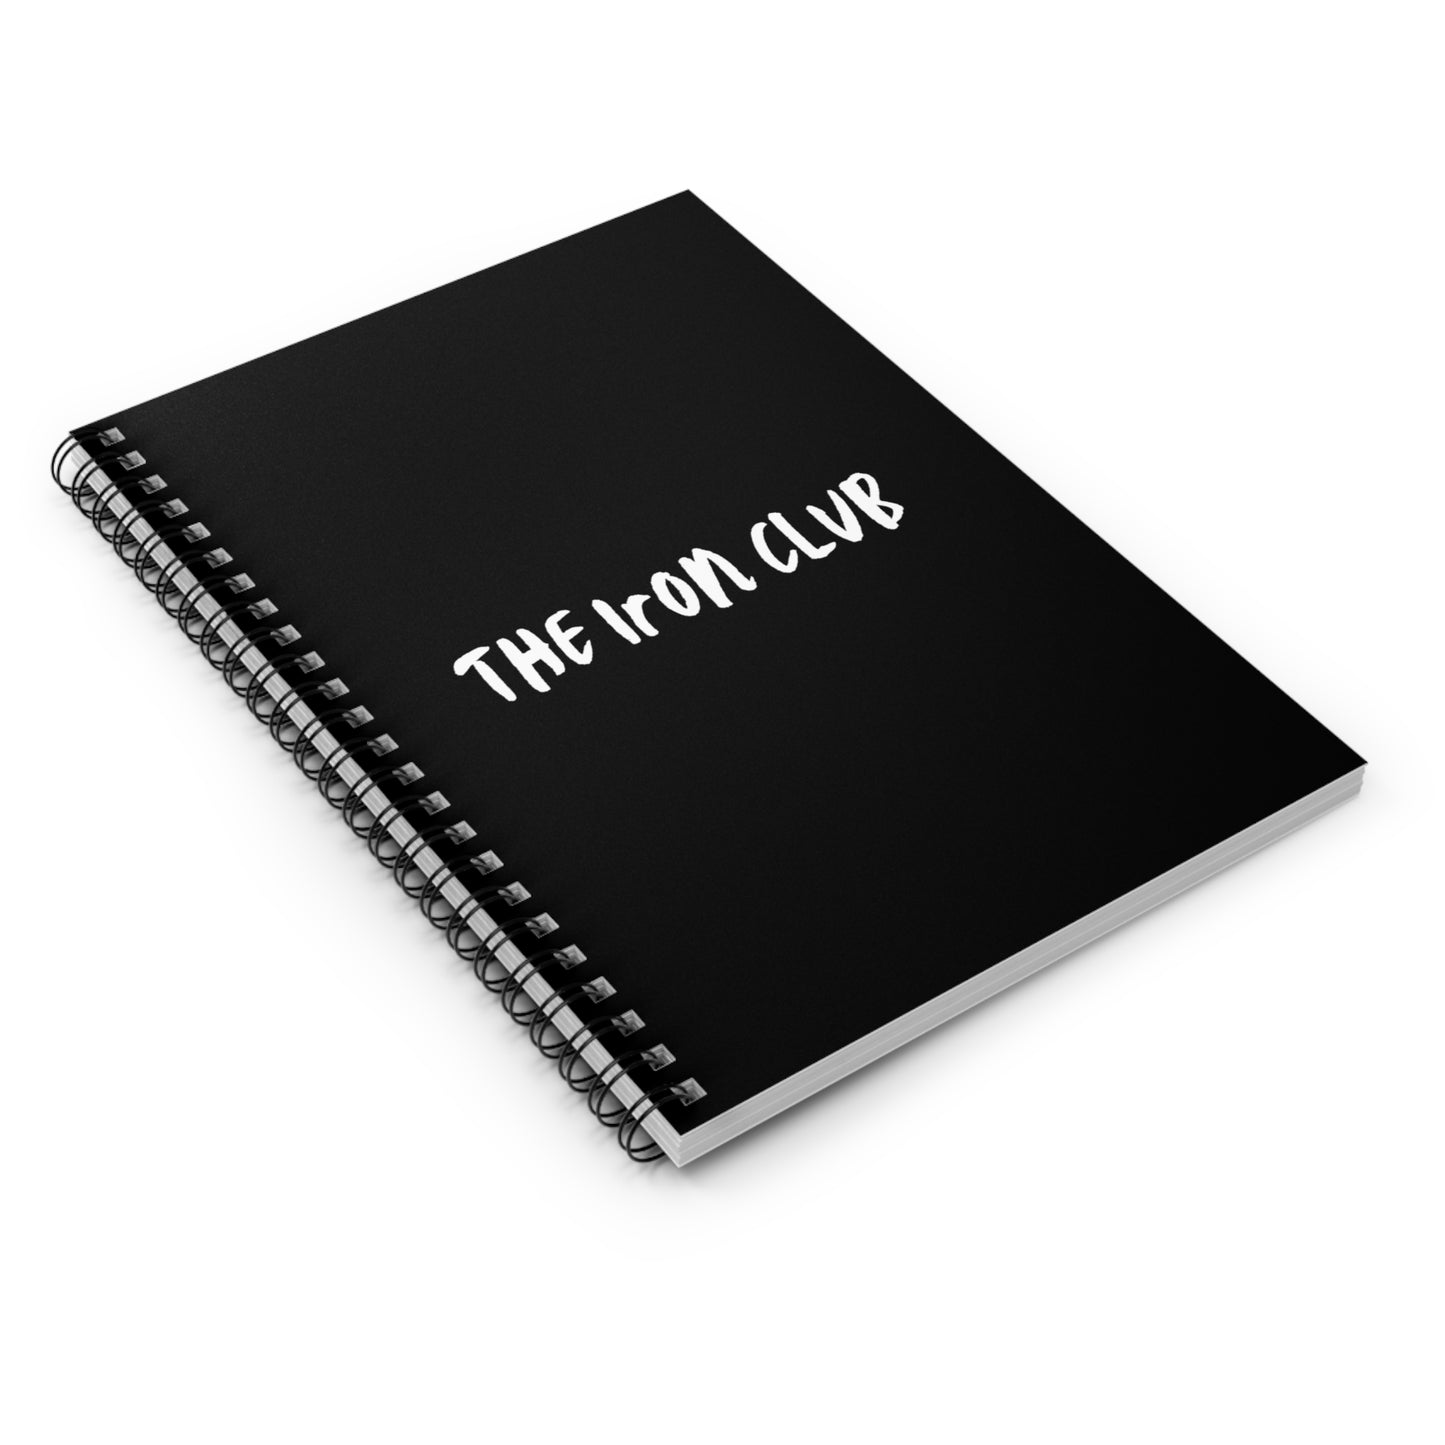 The Iron Club Notebook